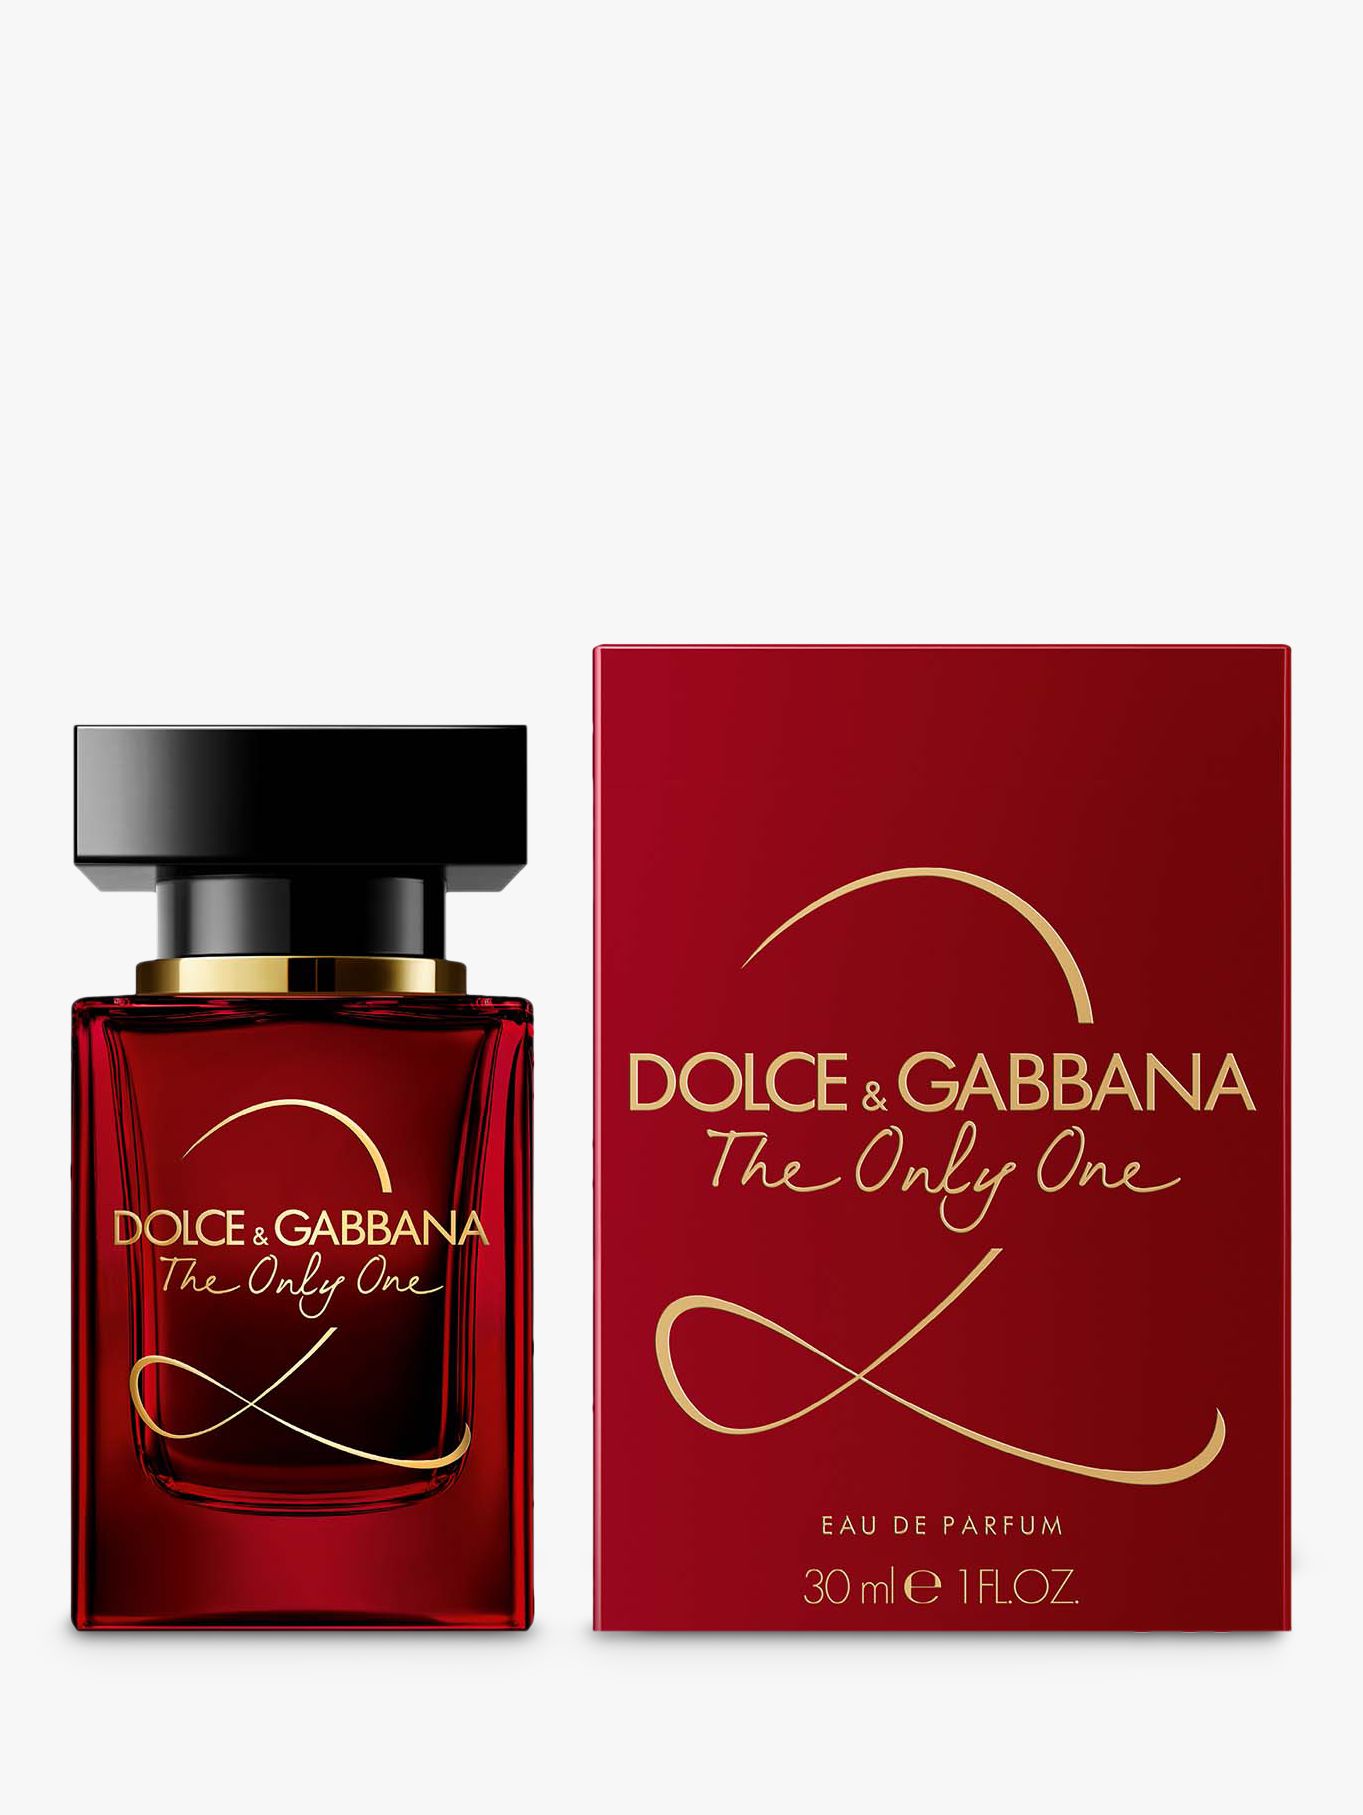 dolce gabbana the only one new